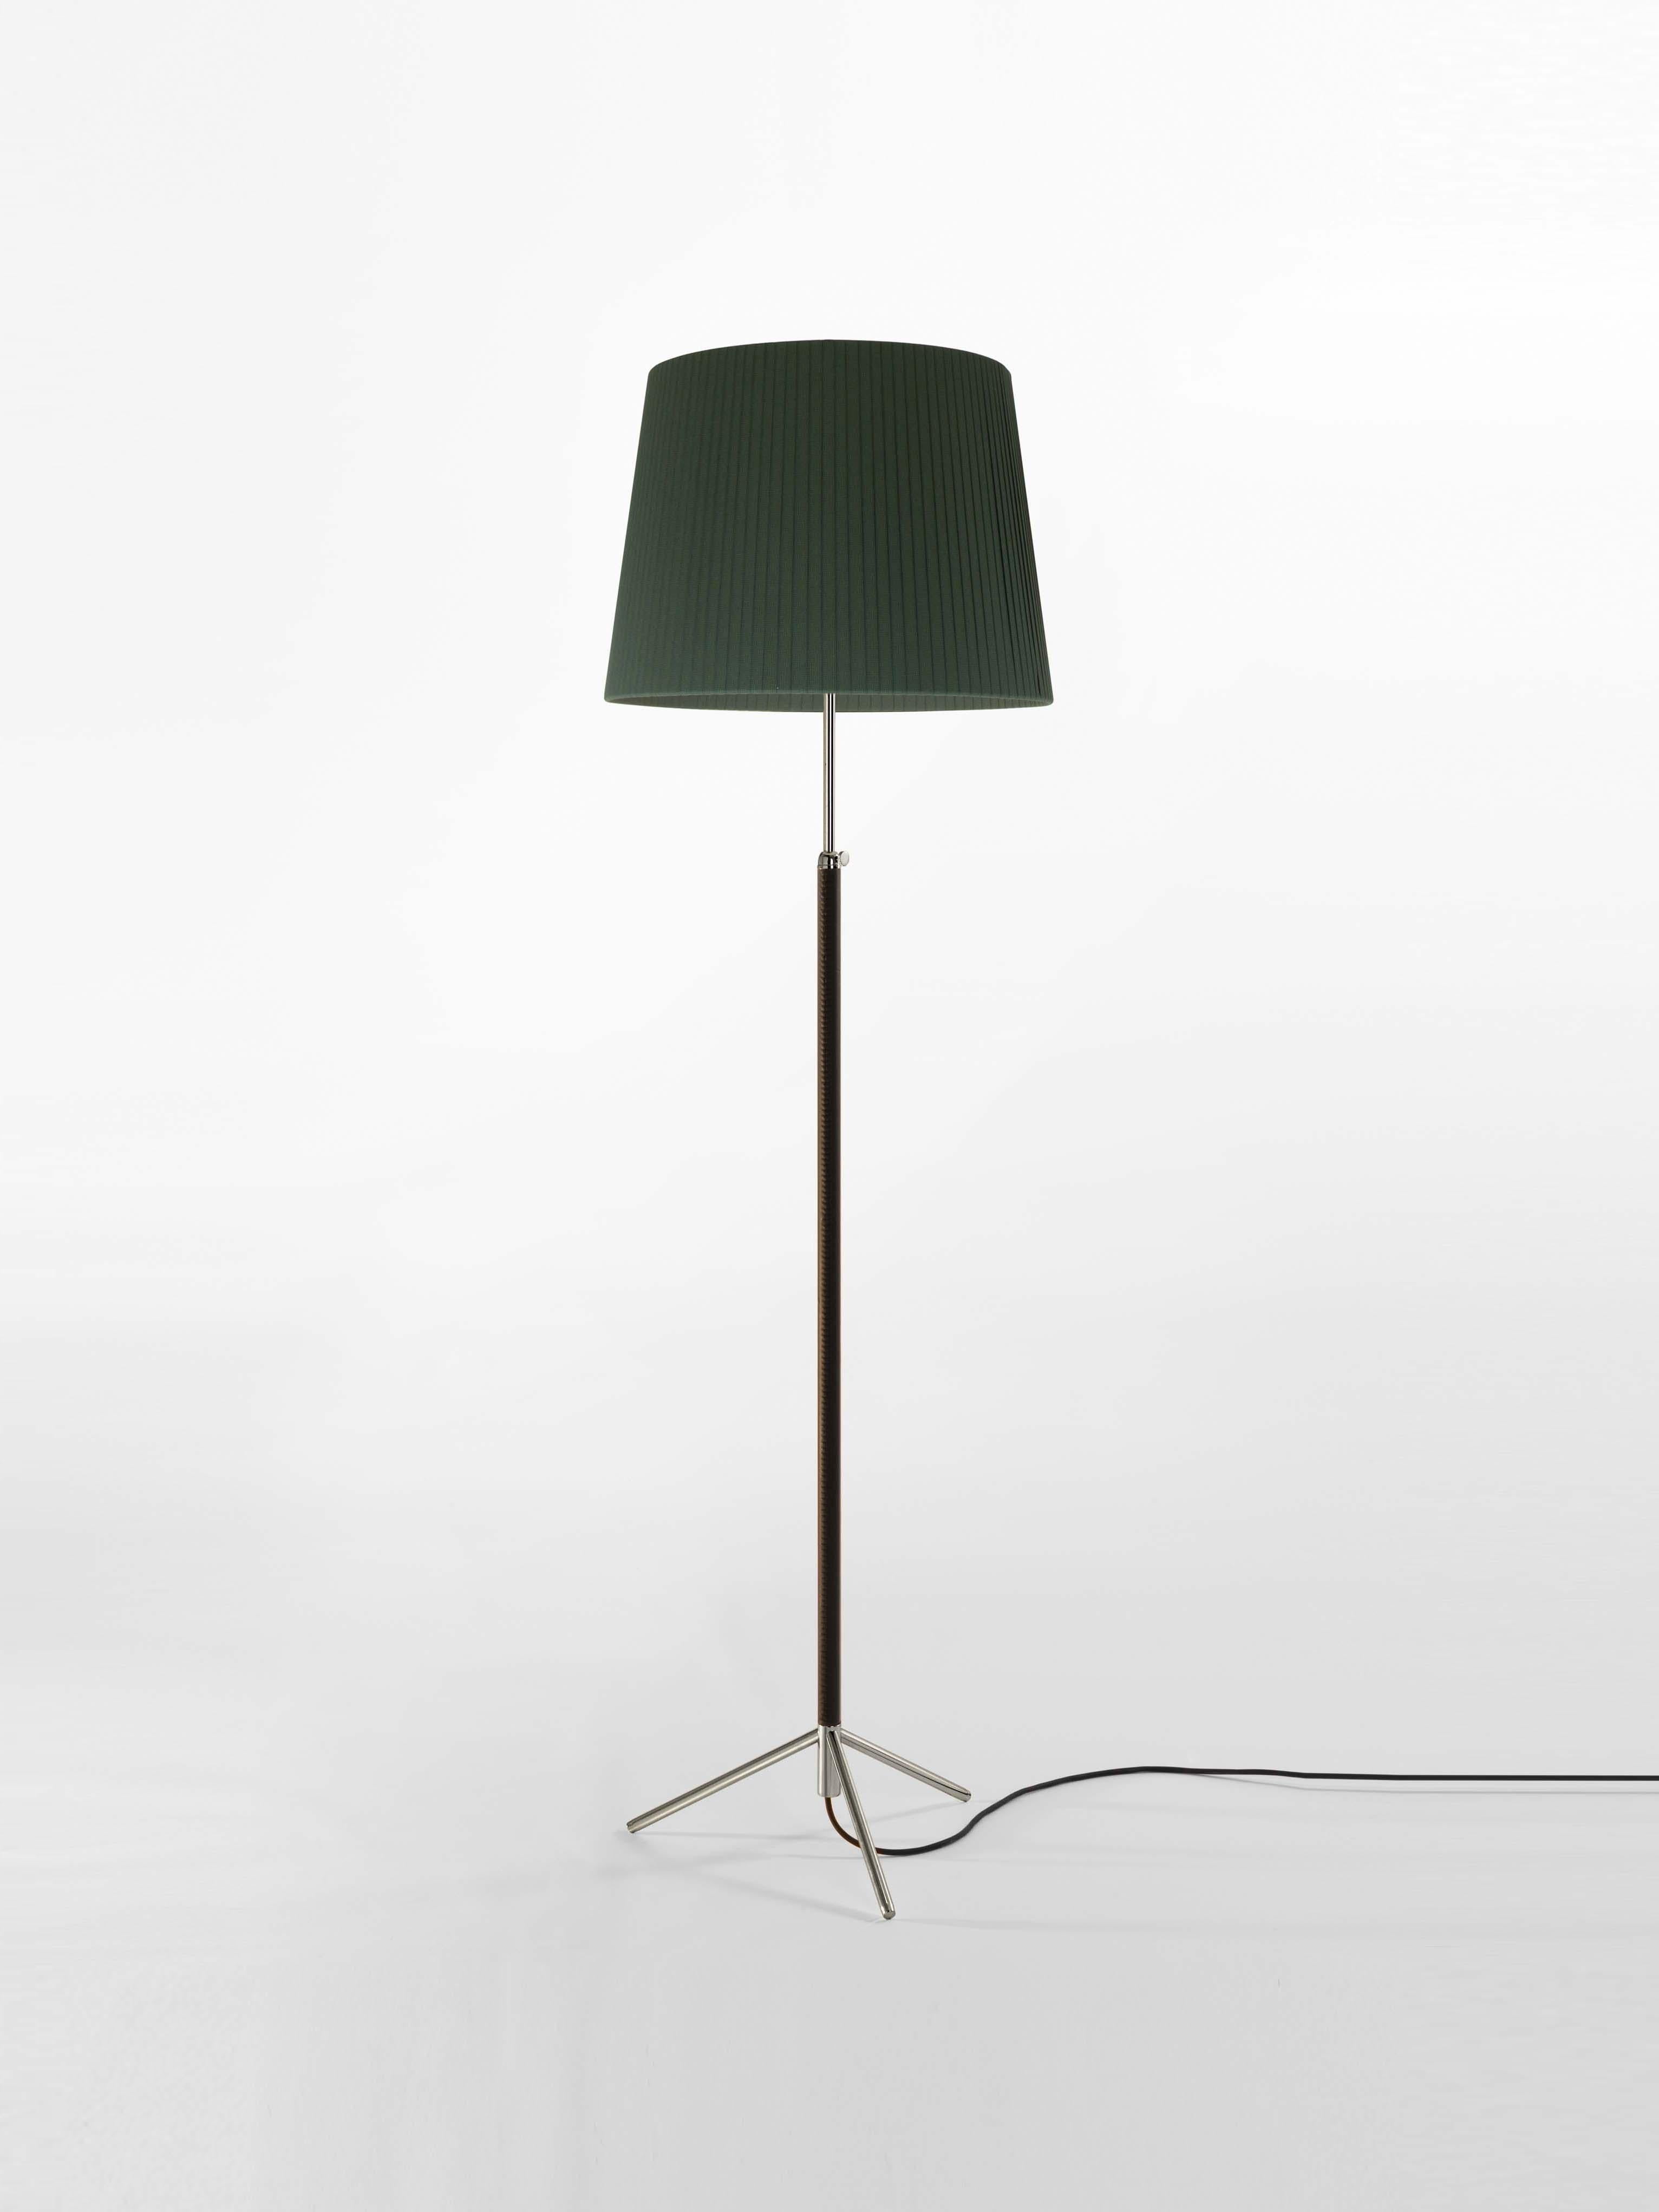 Green and Chrome Pie de Salón G1 floor lamp by Jaume Sans
Dimensions: D 45 x H 120-160 cm
Materials: Metal, leather, ribbon.
Available in chrome-plated or polished brass structure.
Available in other shade colors and sizes.

This slender